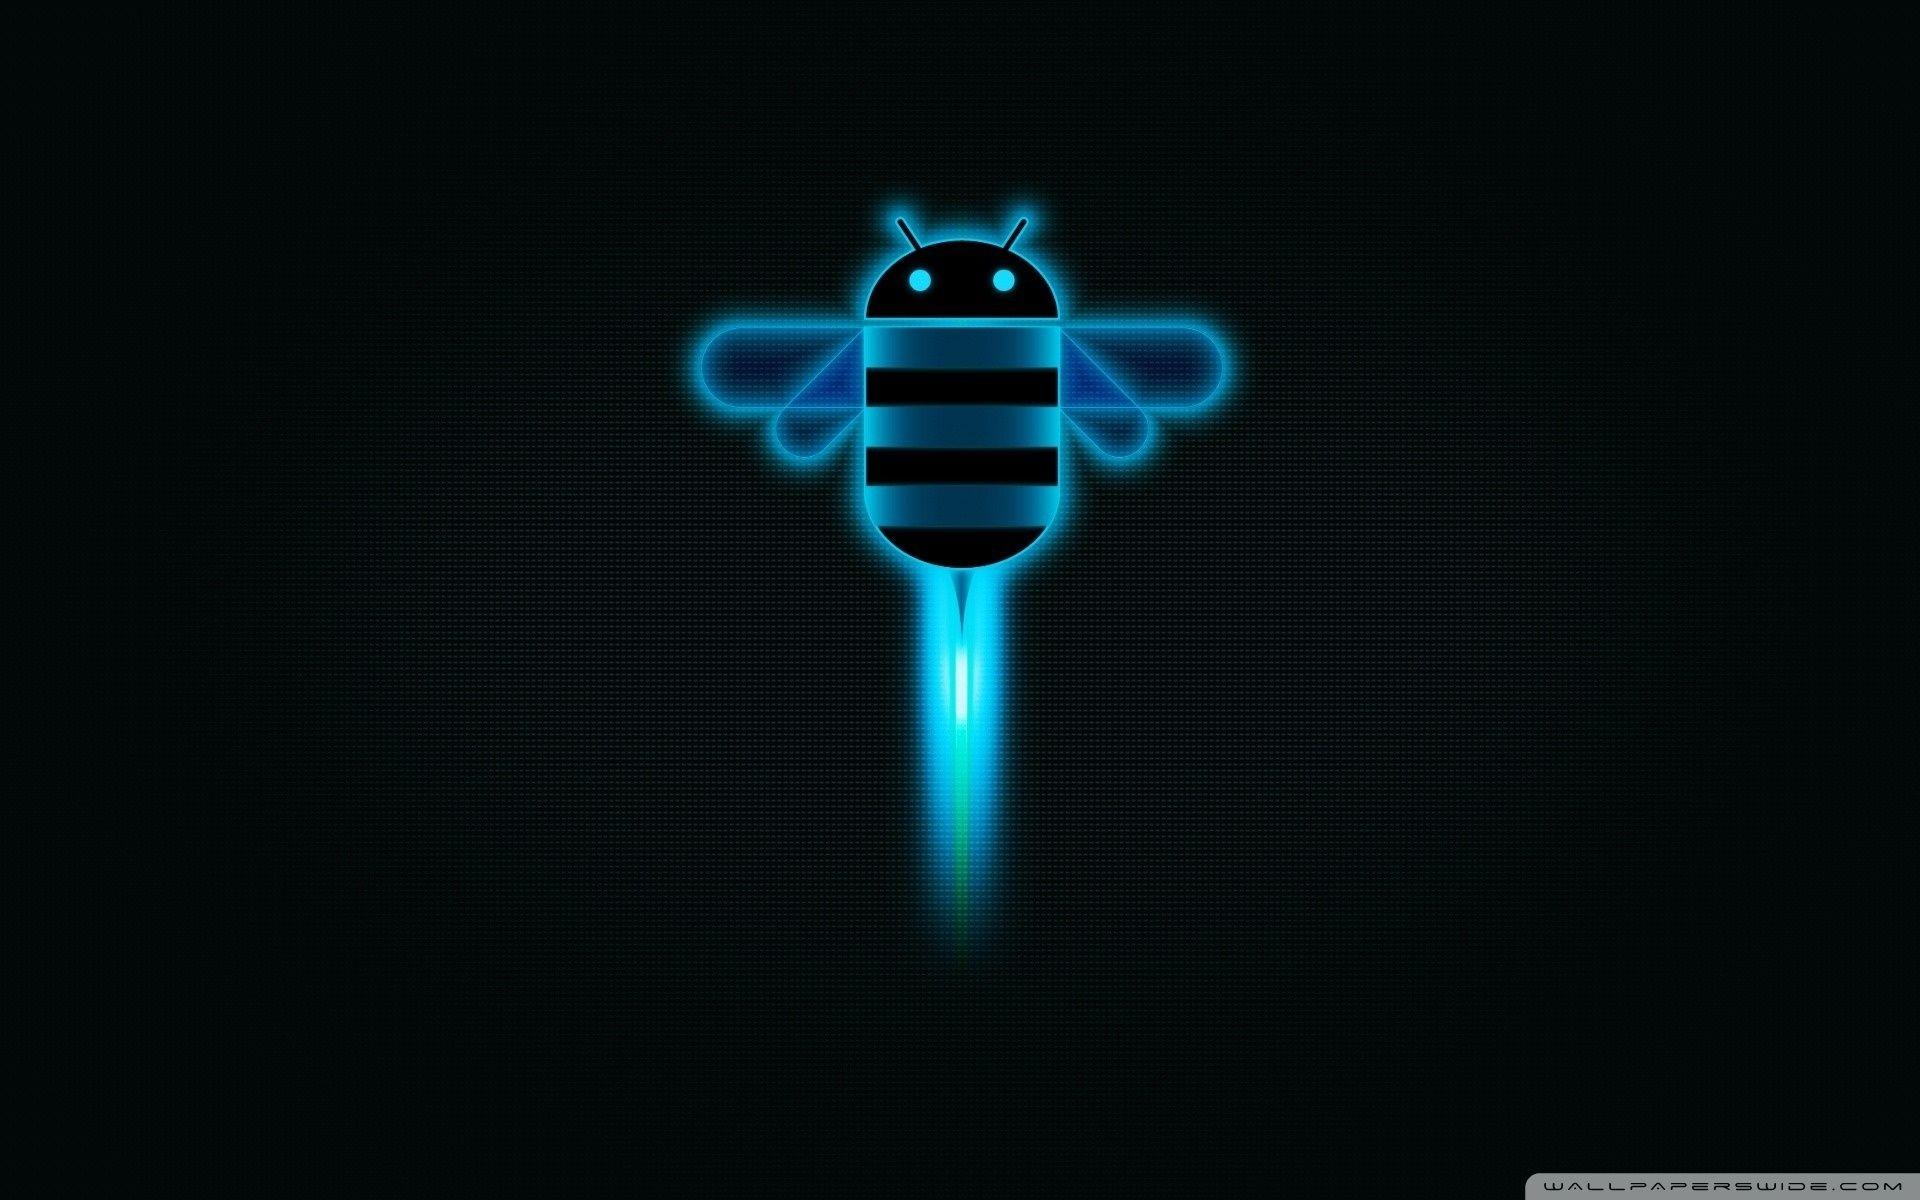 Android Logo Wallpaper Black Brands & Logos, Cool Bee Android